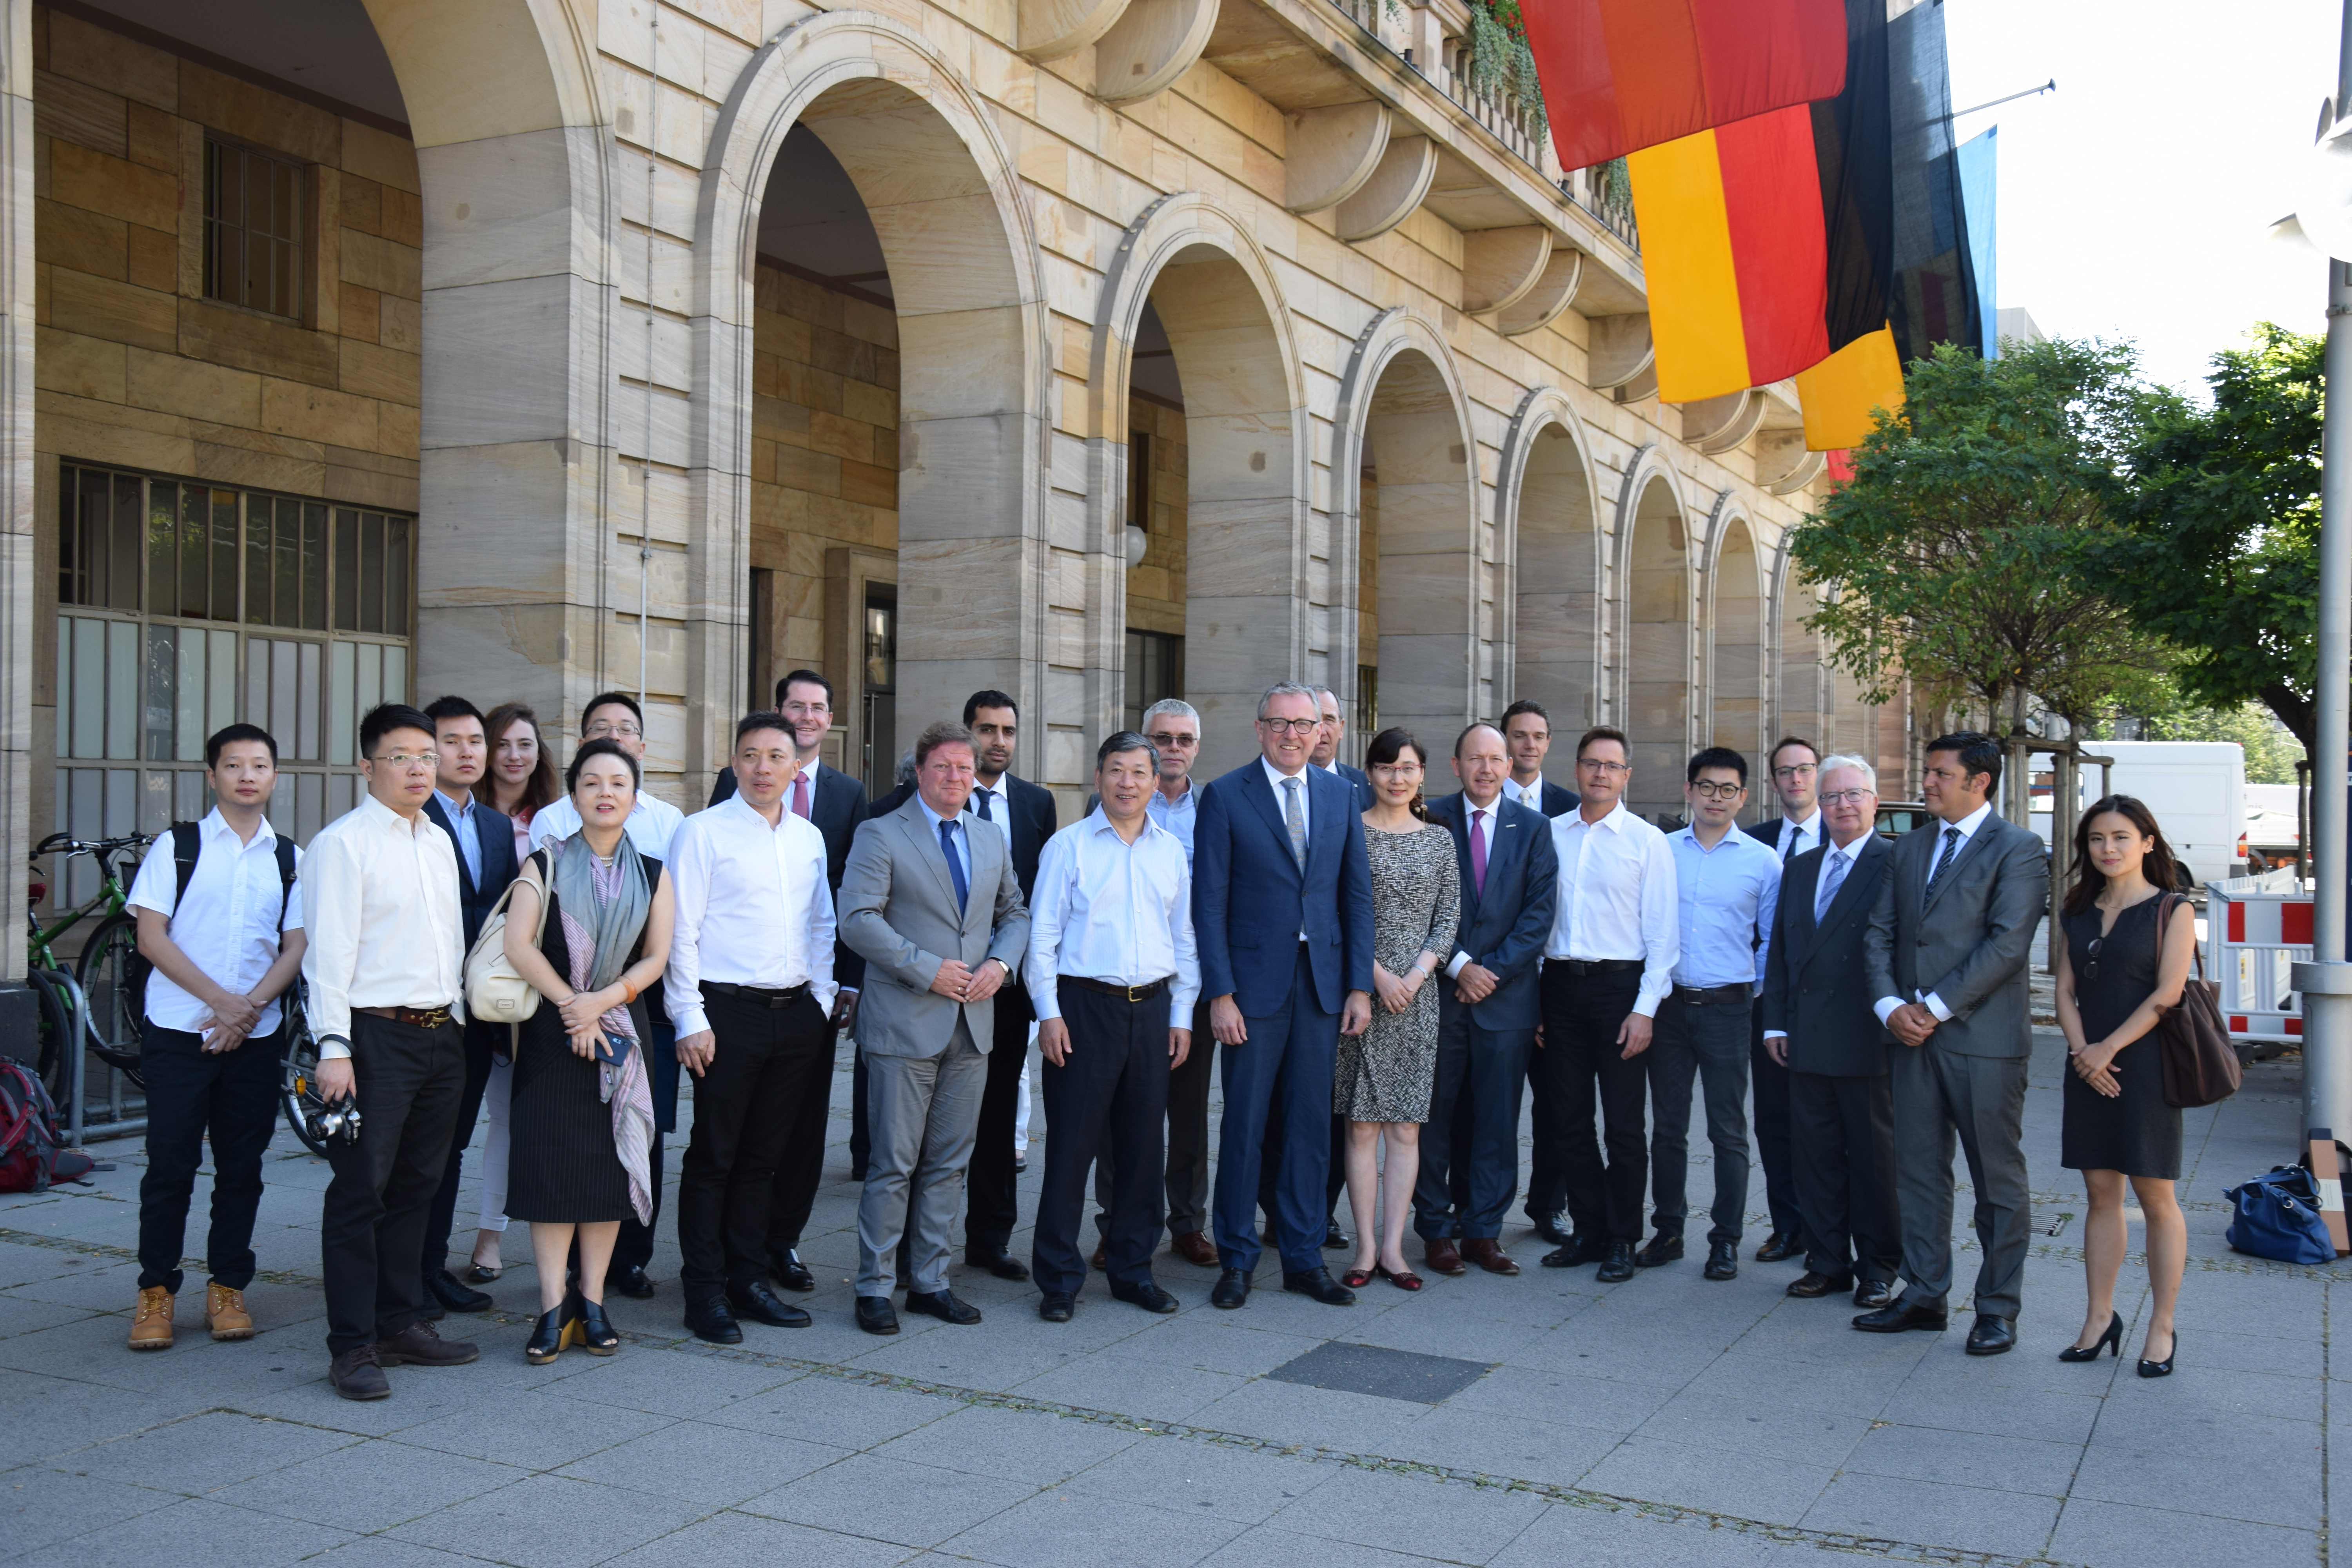 Visit of an official delegation from Chongqing to Mannheim